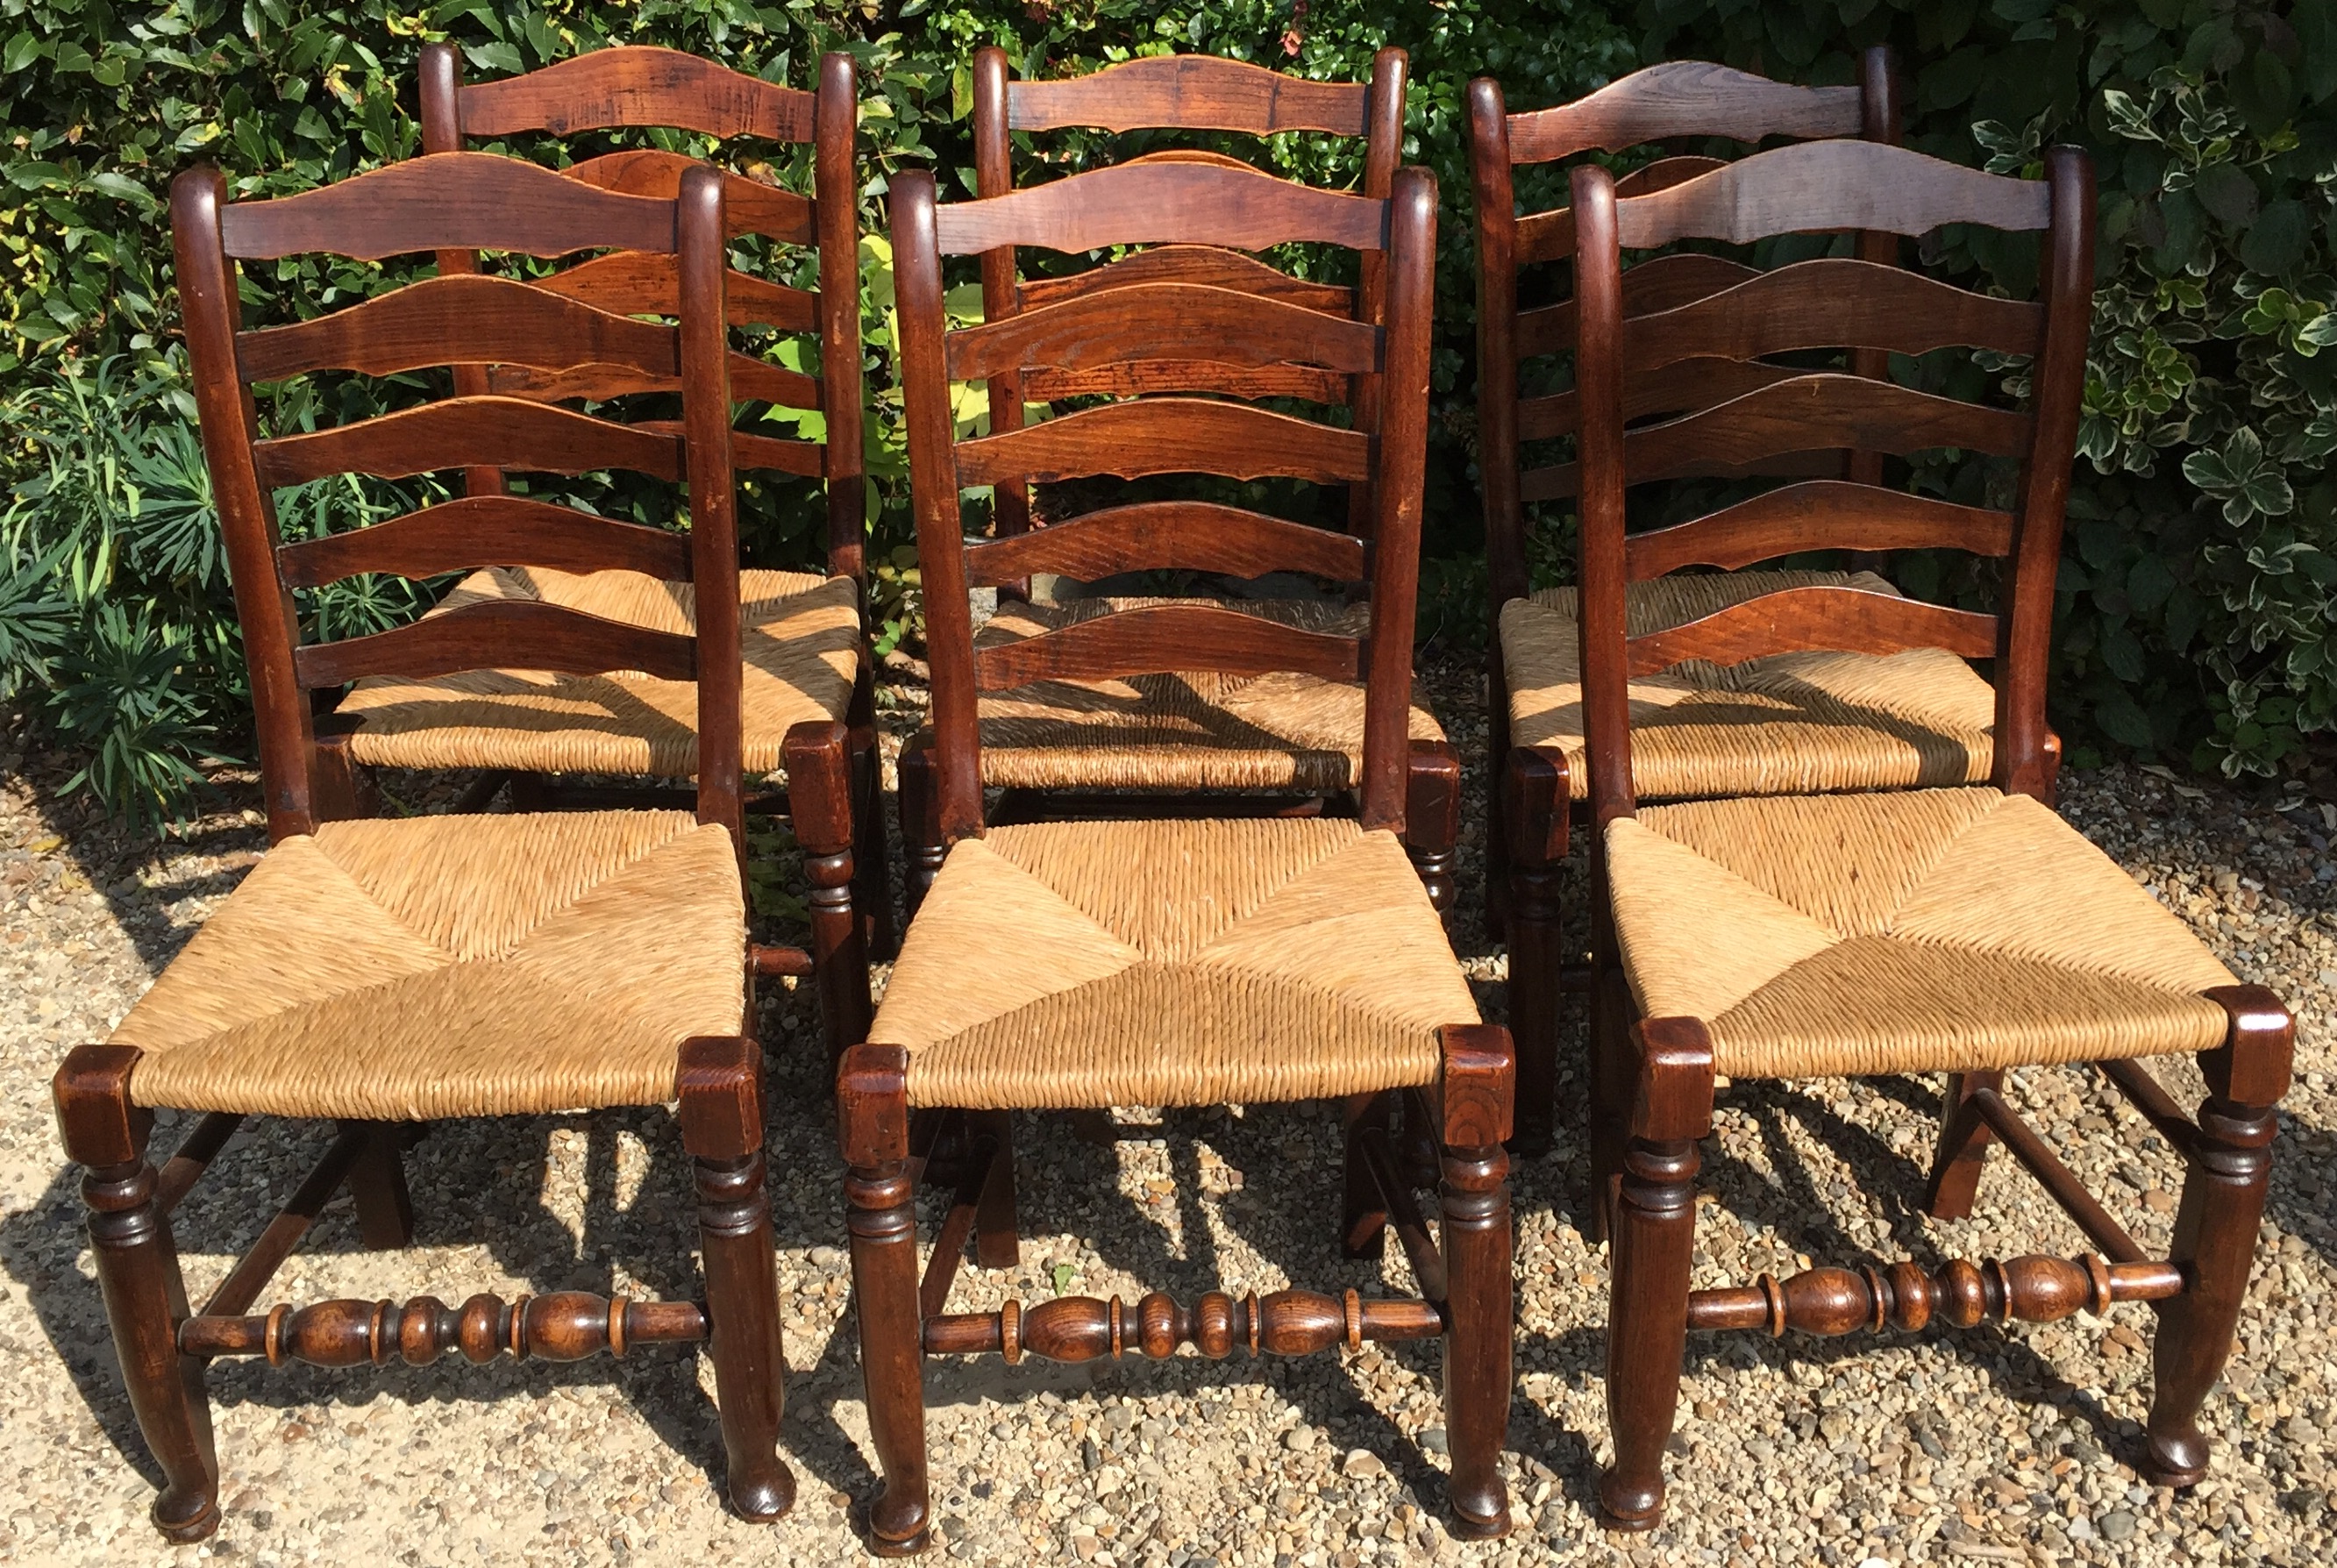 A SET OF SIX 19TH CENTURY OAK LADDER BACK CHAIRS With rush seats.